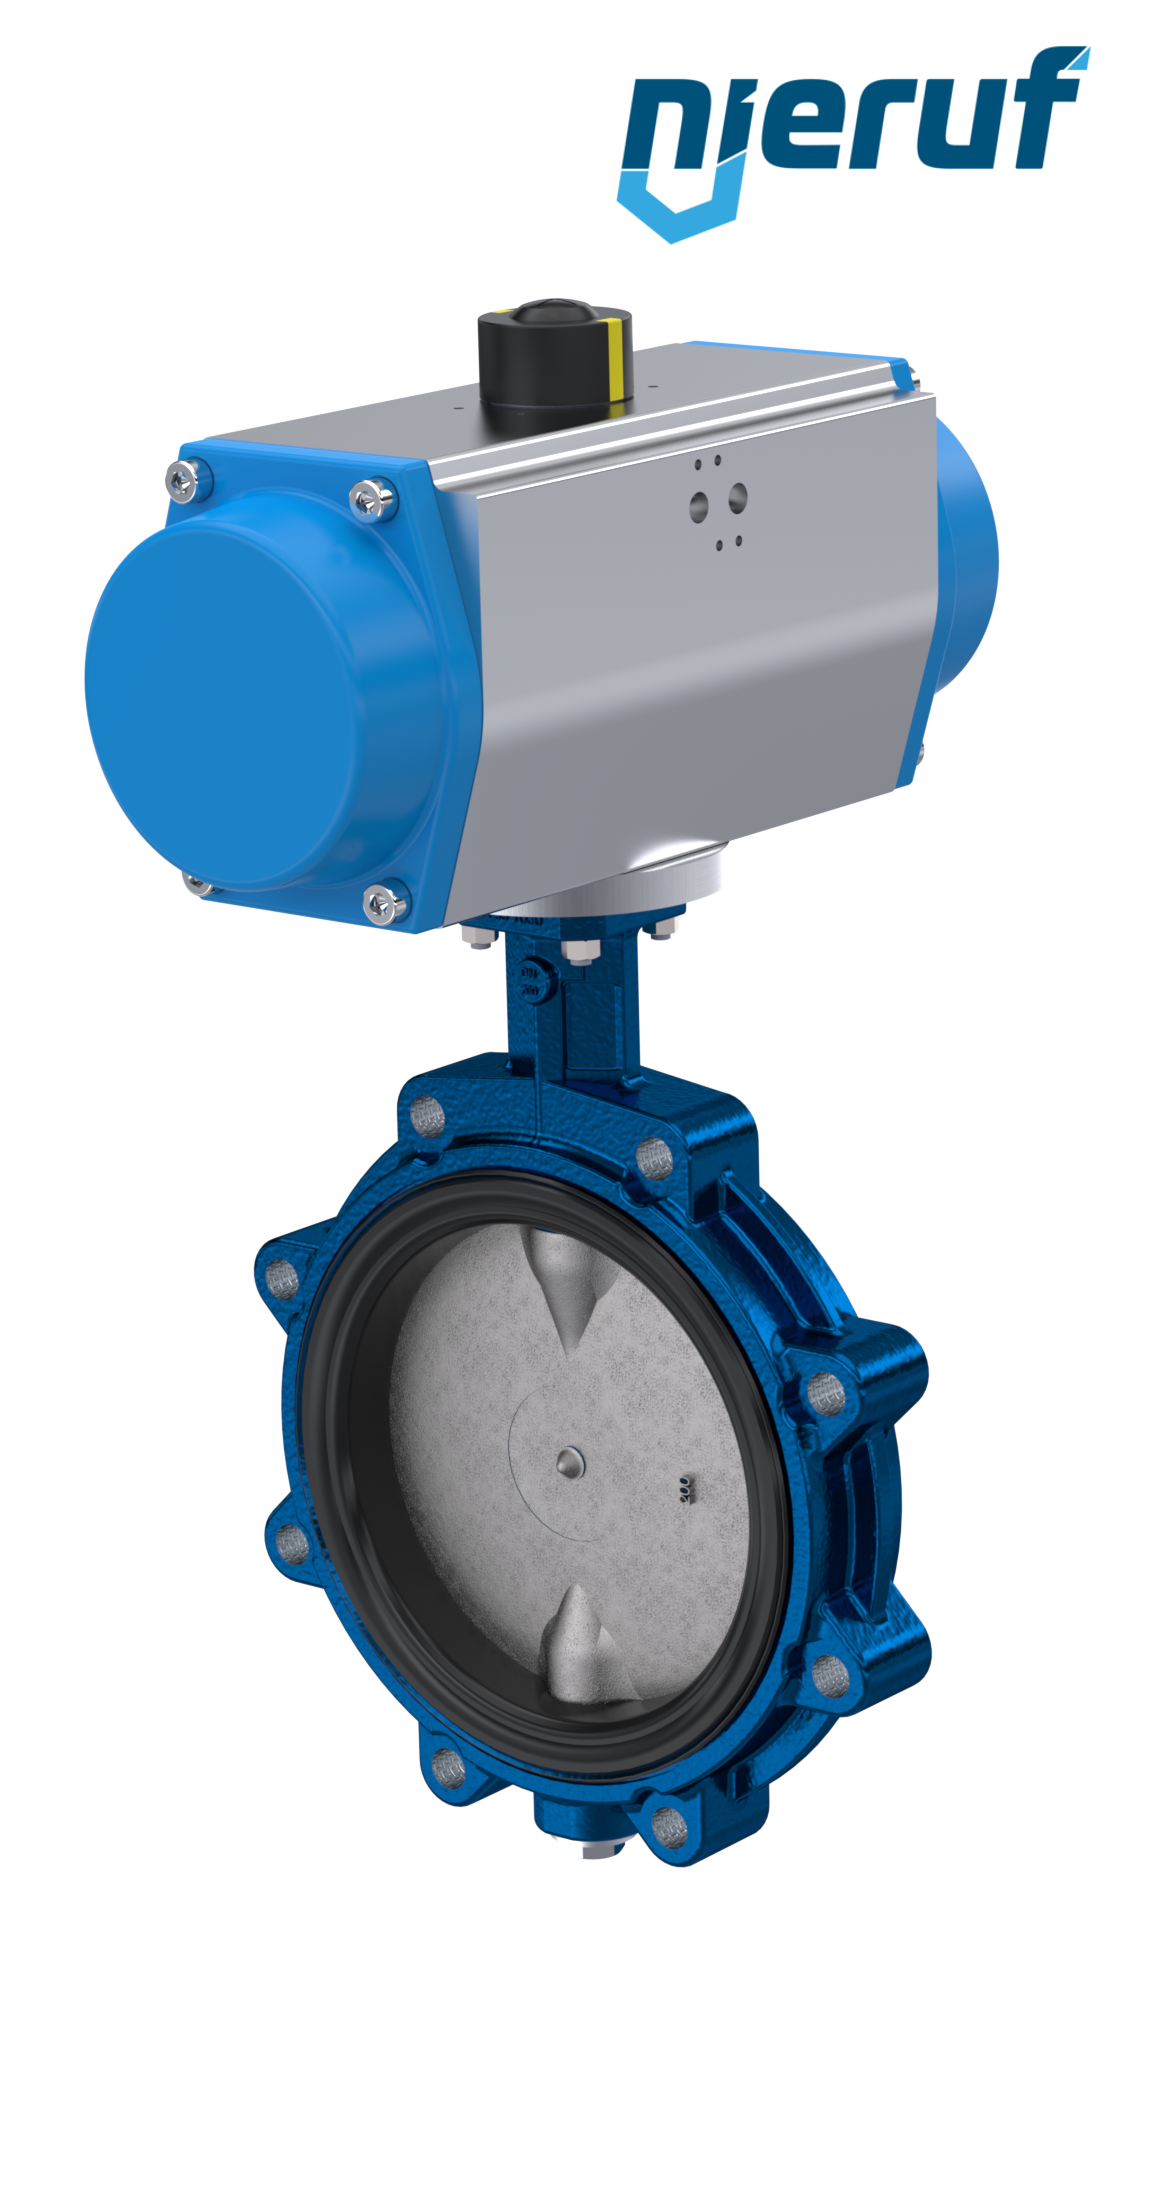 Butterfly valve DN 150 AK02 EPDM DVGW drinking water, WRAS, ACS, W270 pneumatic actuator single acting